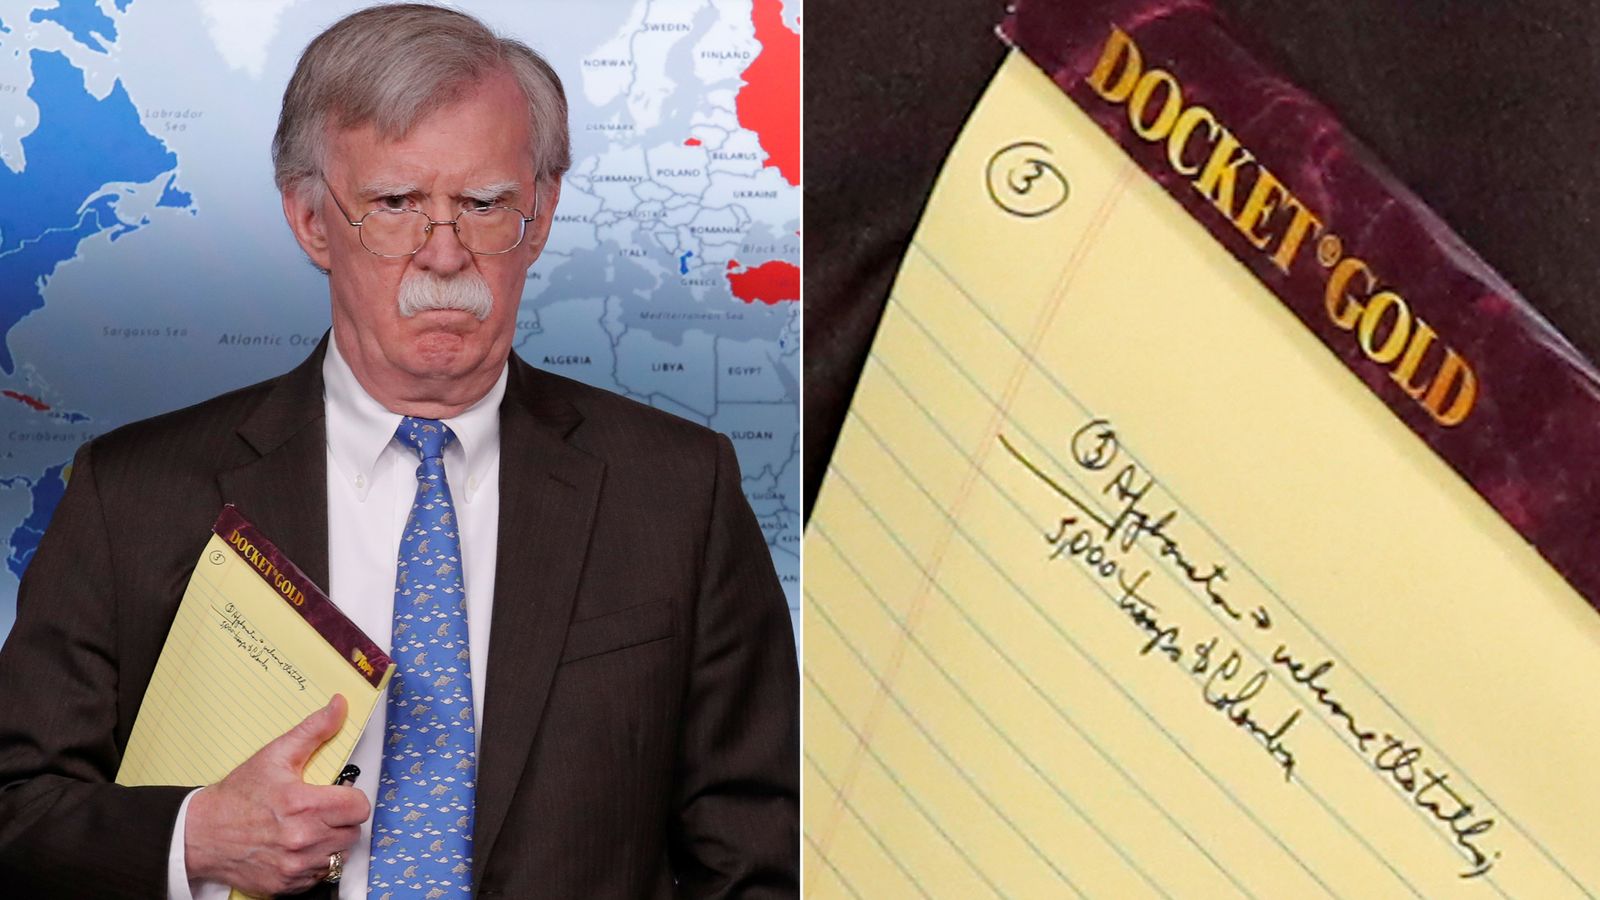 Bolton flashes '5,000 troops to Colombia' note as he announces new Venezuela sanctions ...1600 x 900